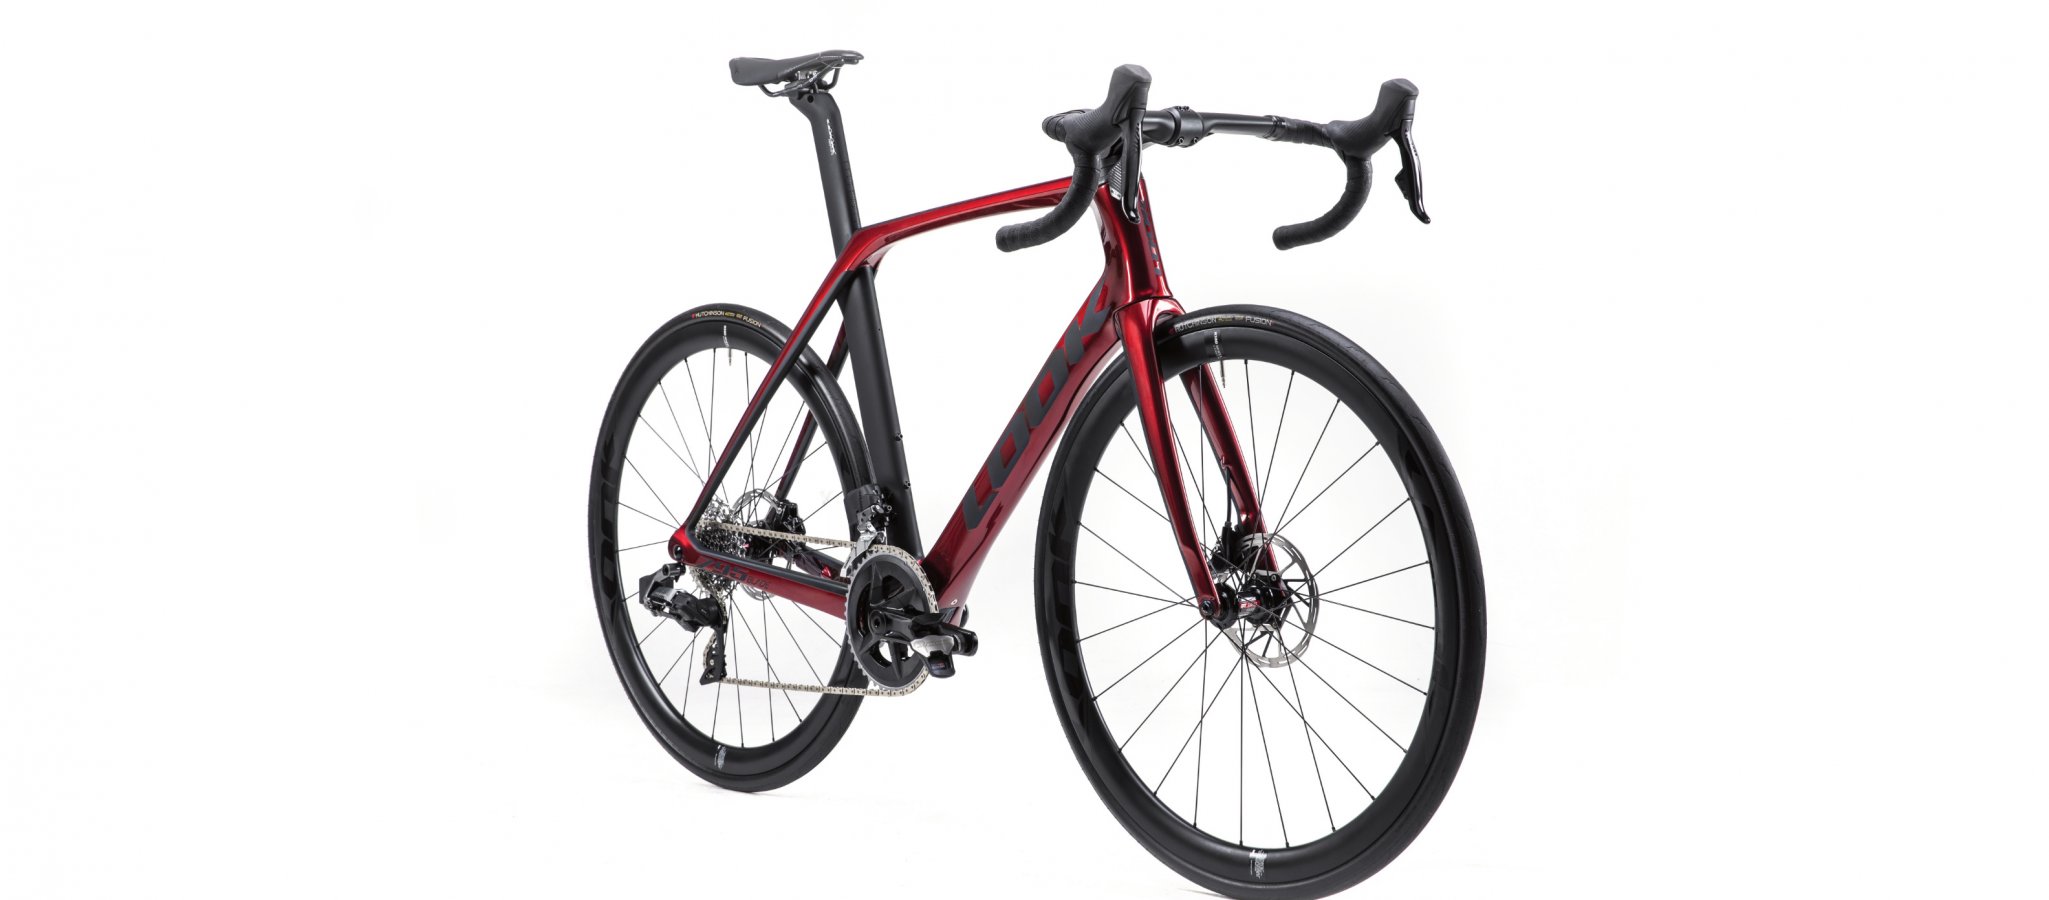 795-blade-rs-sram-rival-axs-inteference-a2